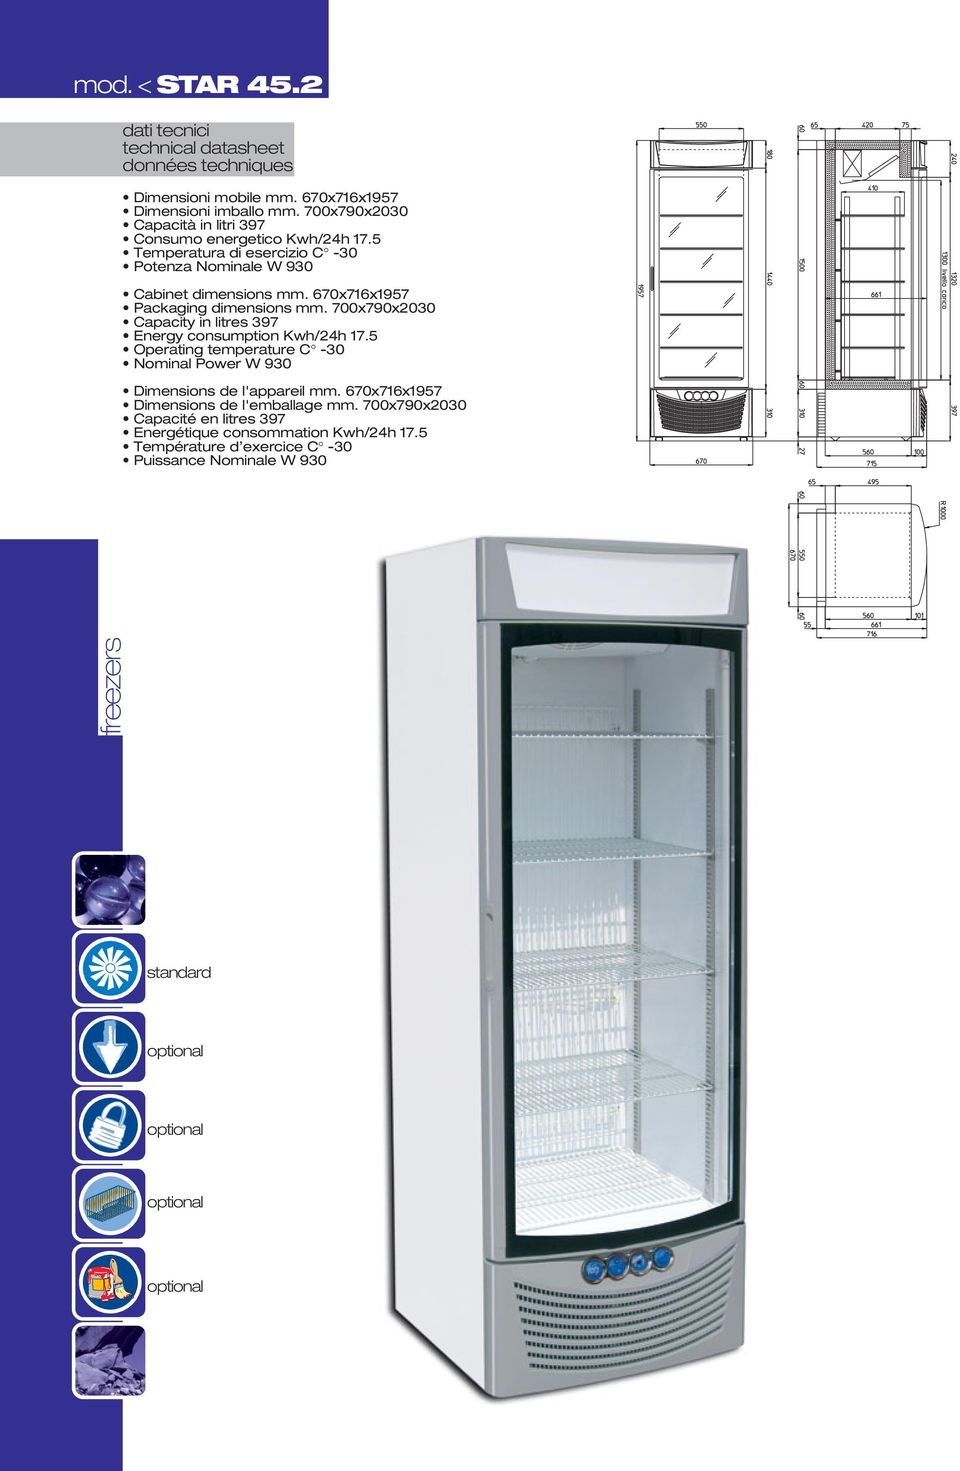 670x716x1957 Packaging dimensions mm. 700x790x2030 Energy consumption Kwh/24h 17.